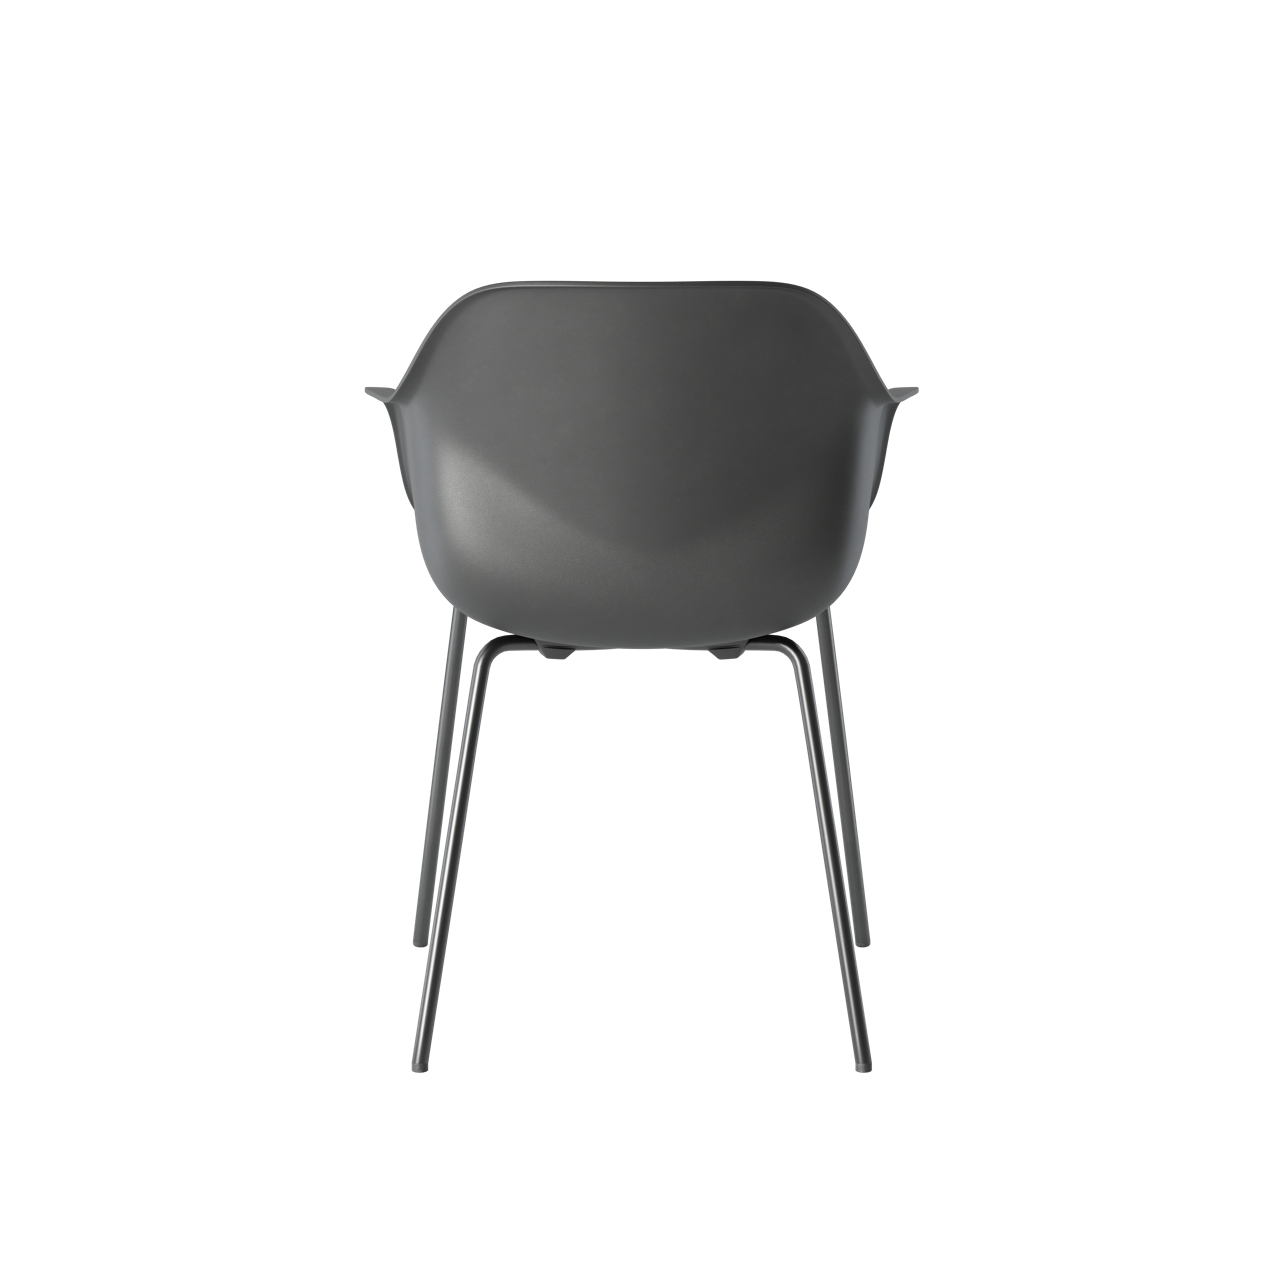 OCEE&FOUR – Chairs – FourMe 44 – Plastic shell - Seat Pad - Packshot Image 1 Large